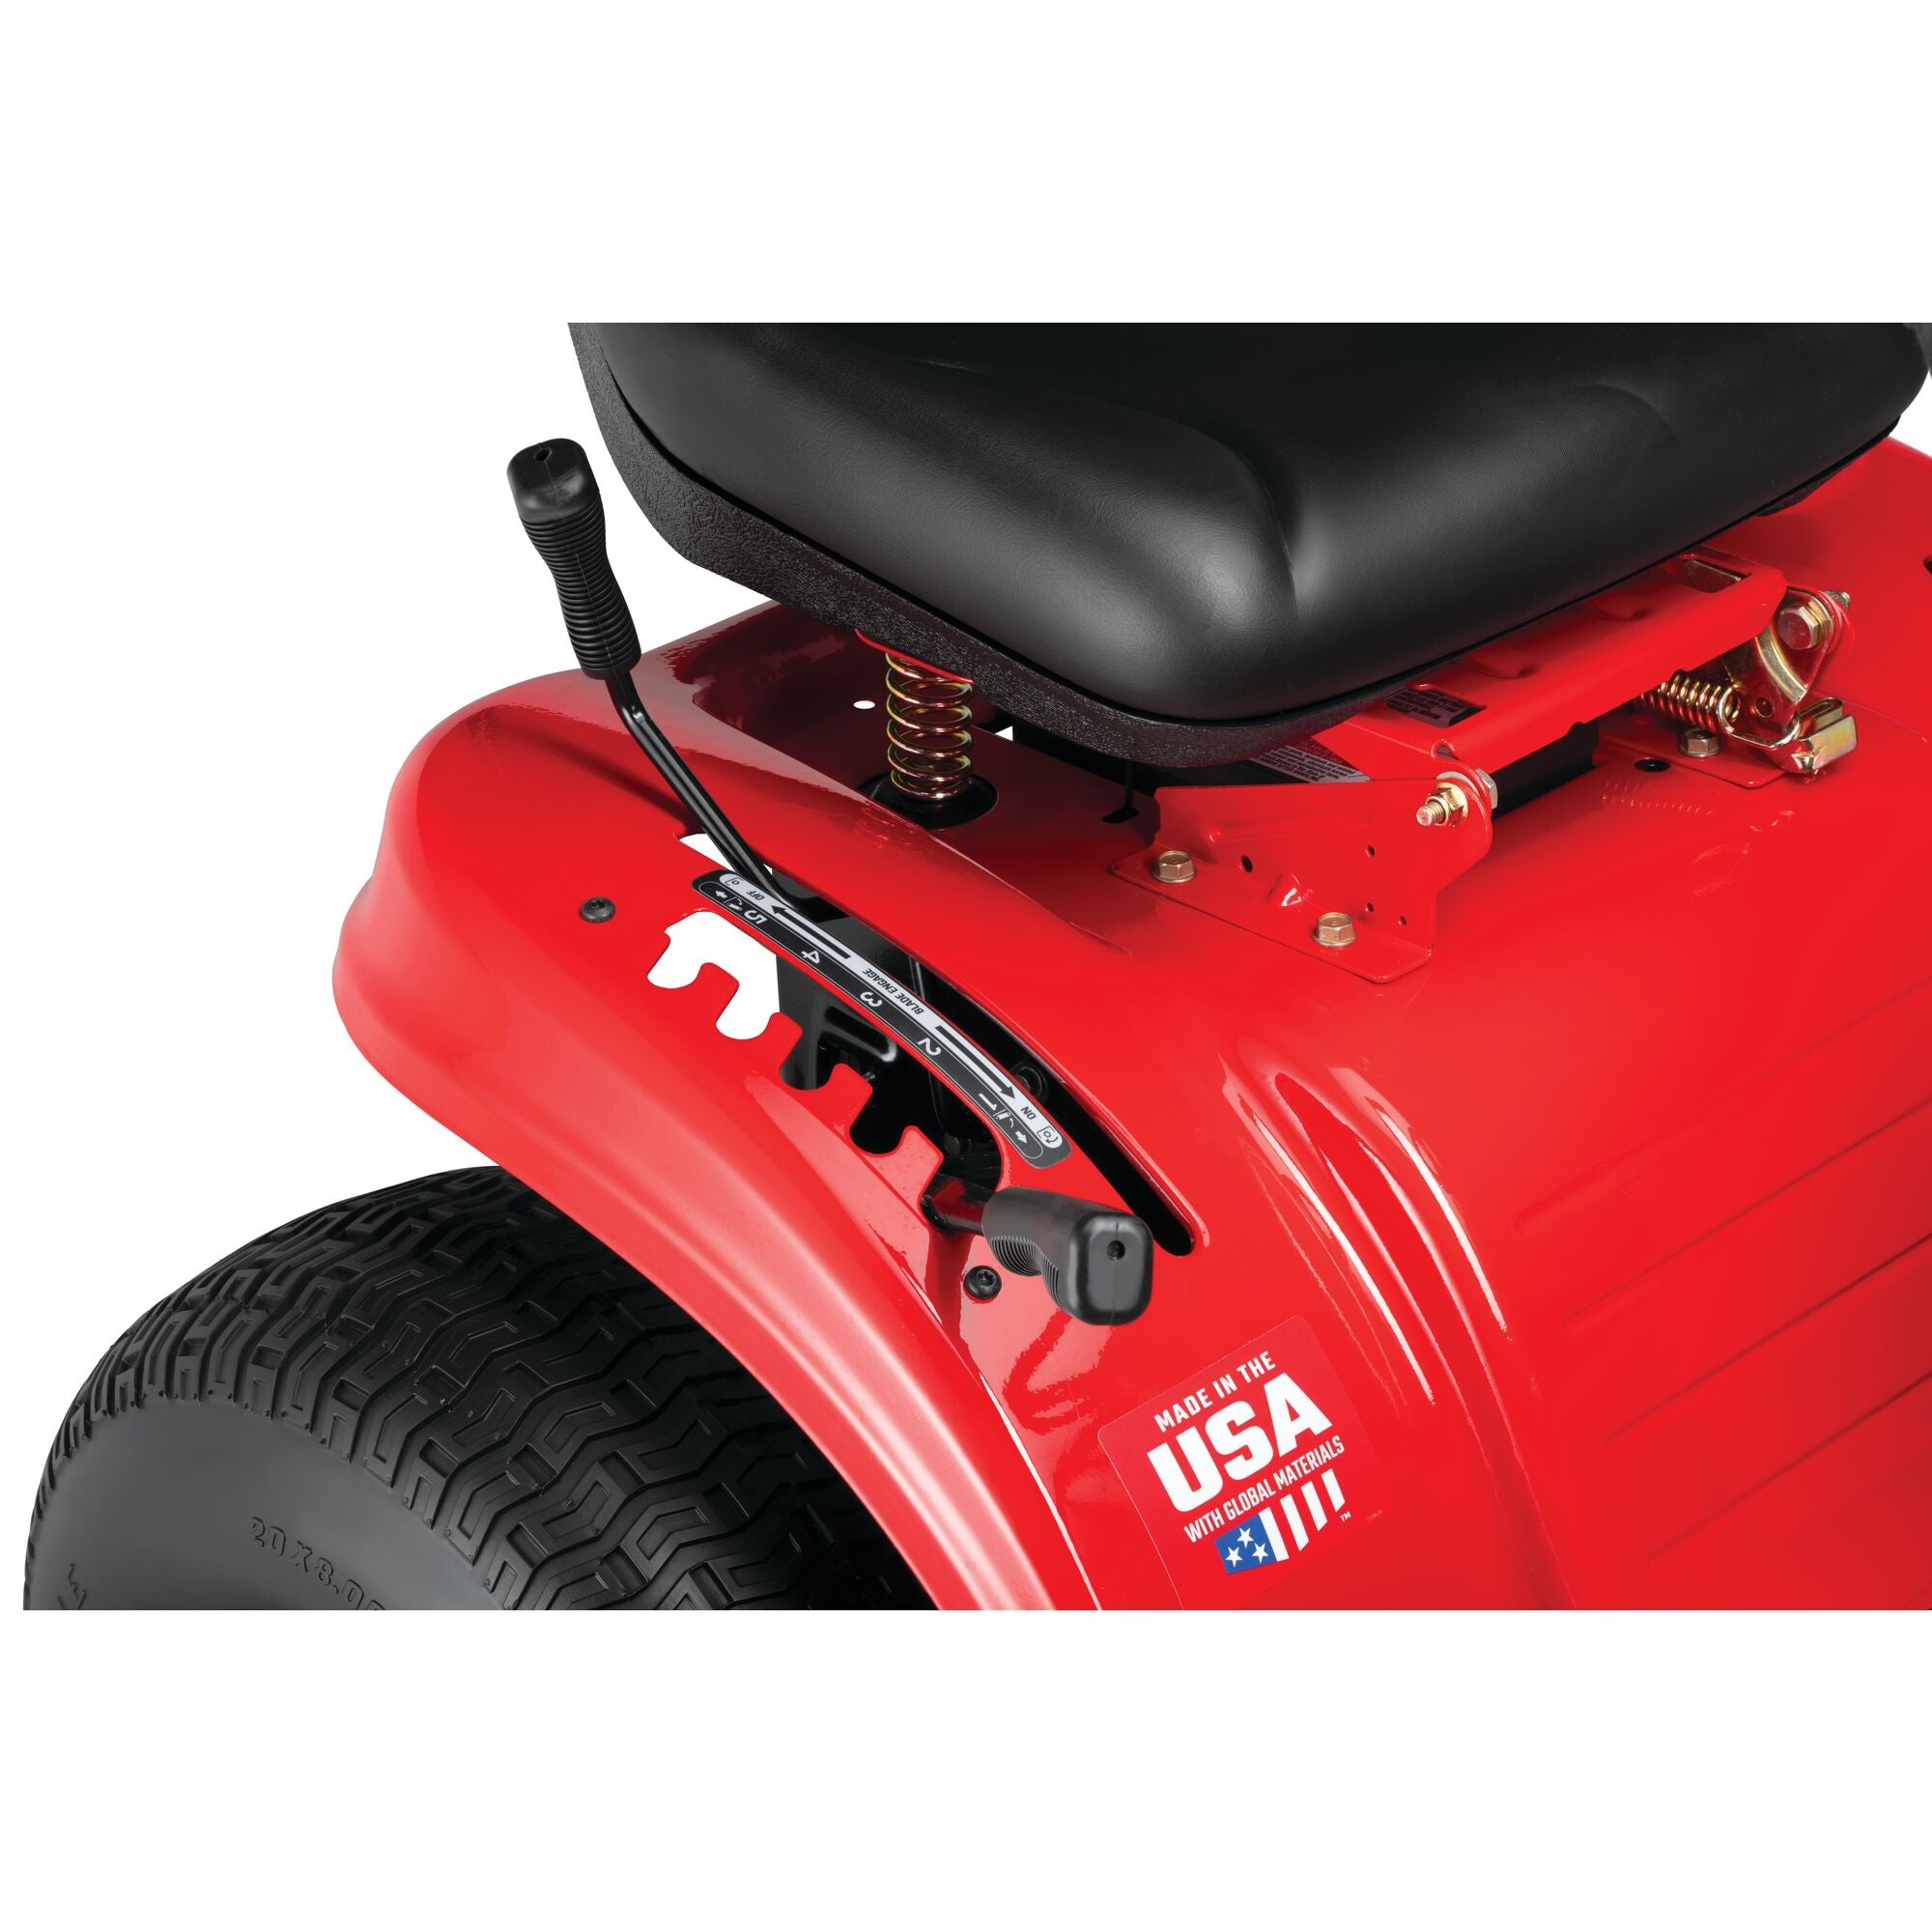 Gear feature of a 42 inch 17.5 h p gear drive riding mower.